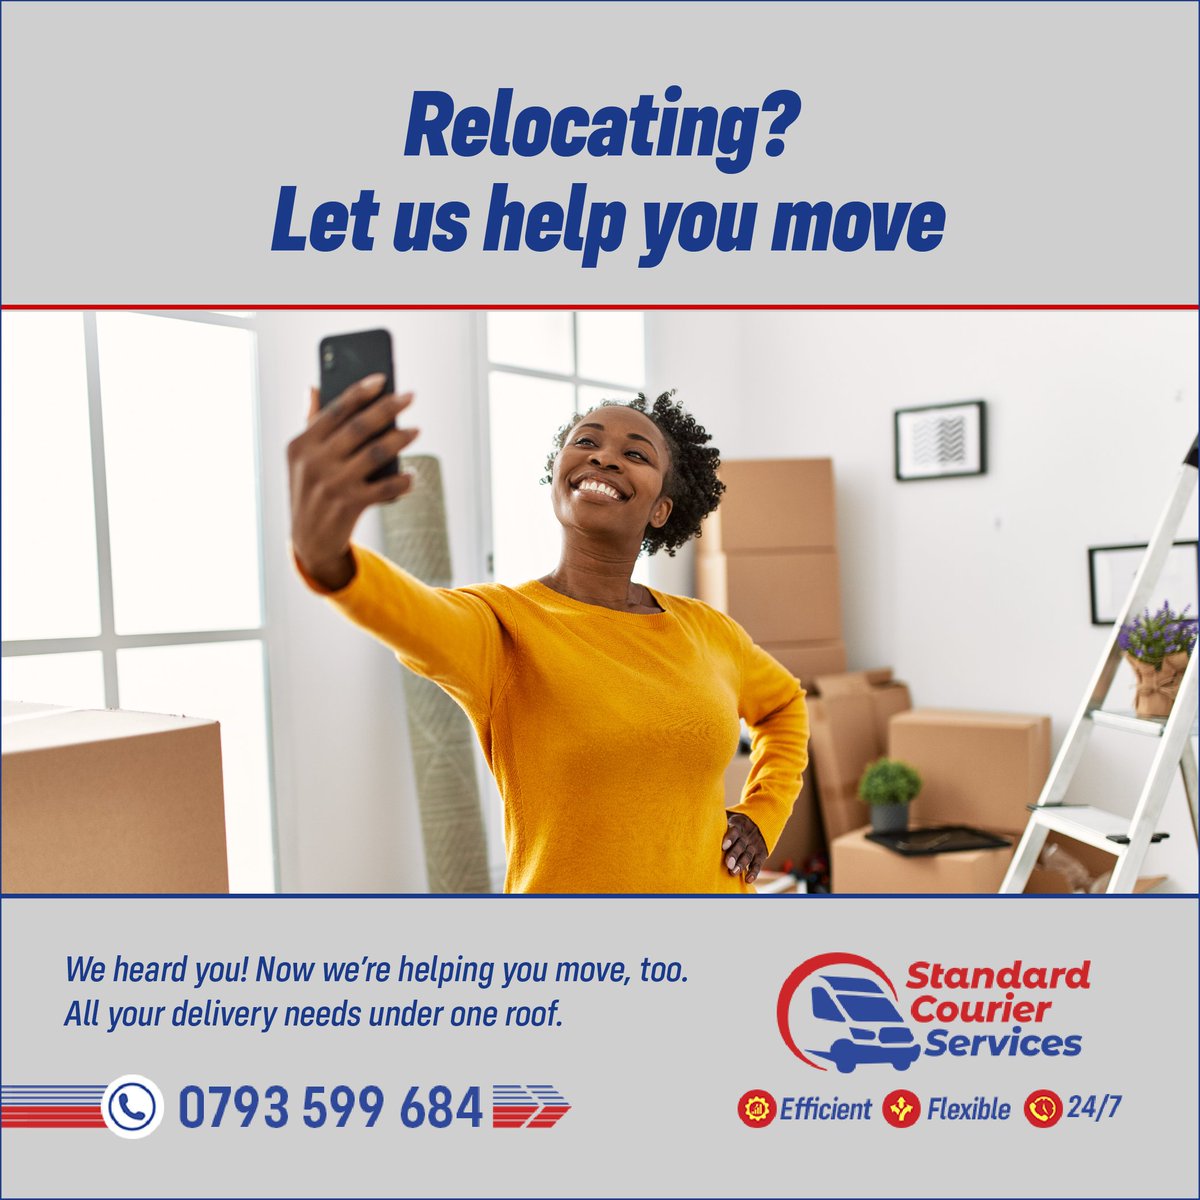 In the world of deliveries, we go above and beyond. Join us for a partnership that guarantees more than you anticipate. Call us now at 0793599684 or visit standardmedia.co.ke/courier/